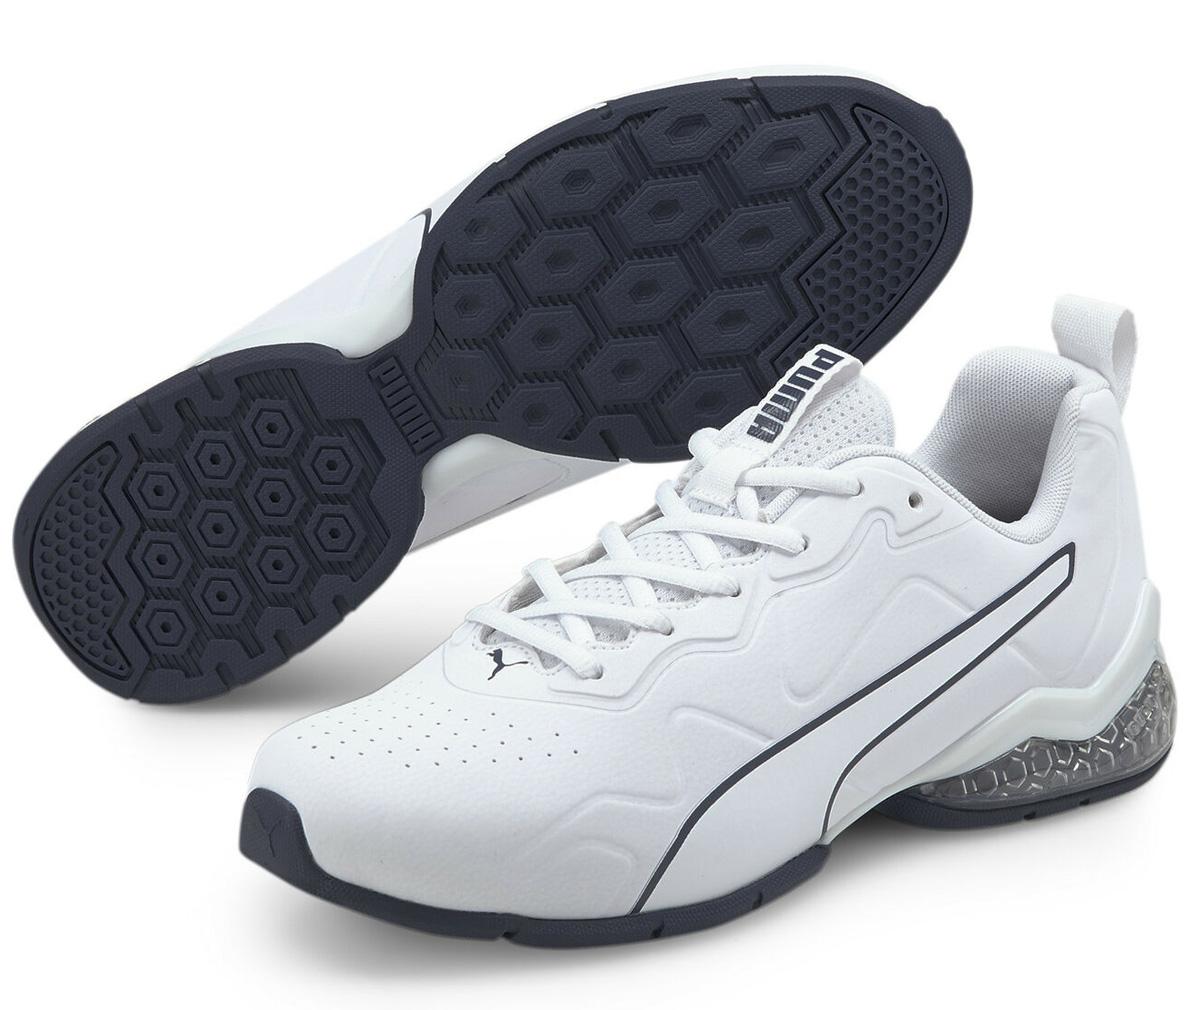 Puma Mens Cell Valiant Training Shoes for $29.99 Shipped